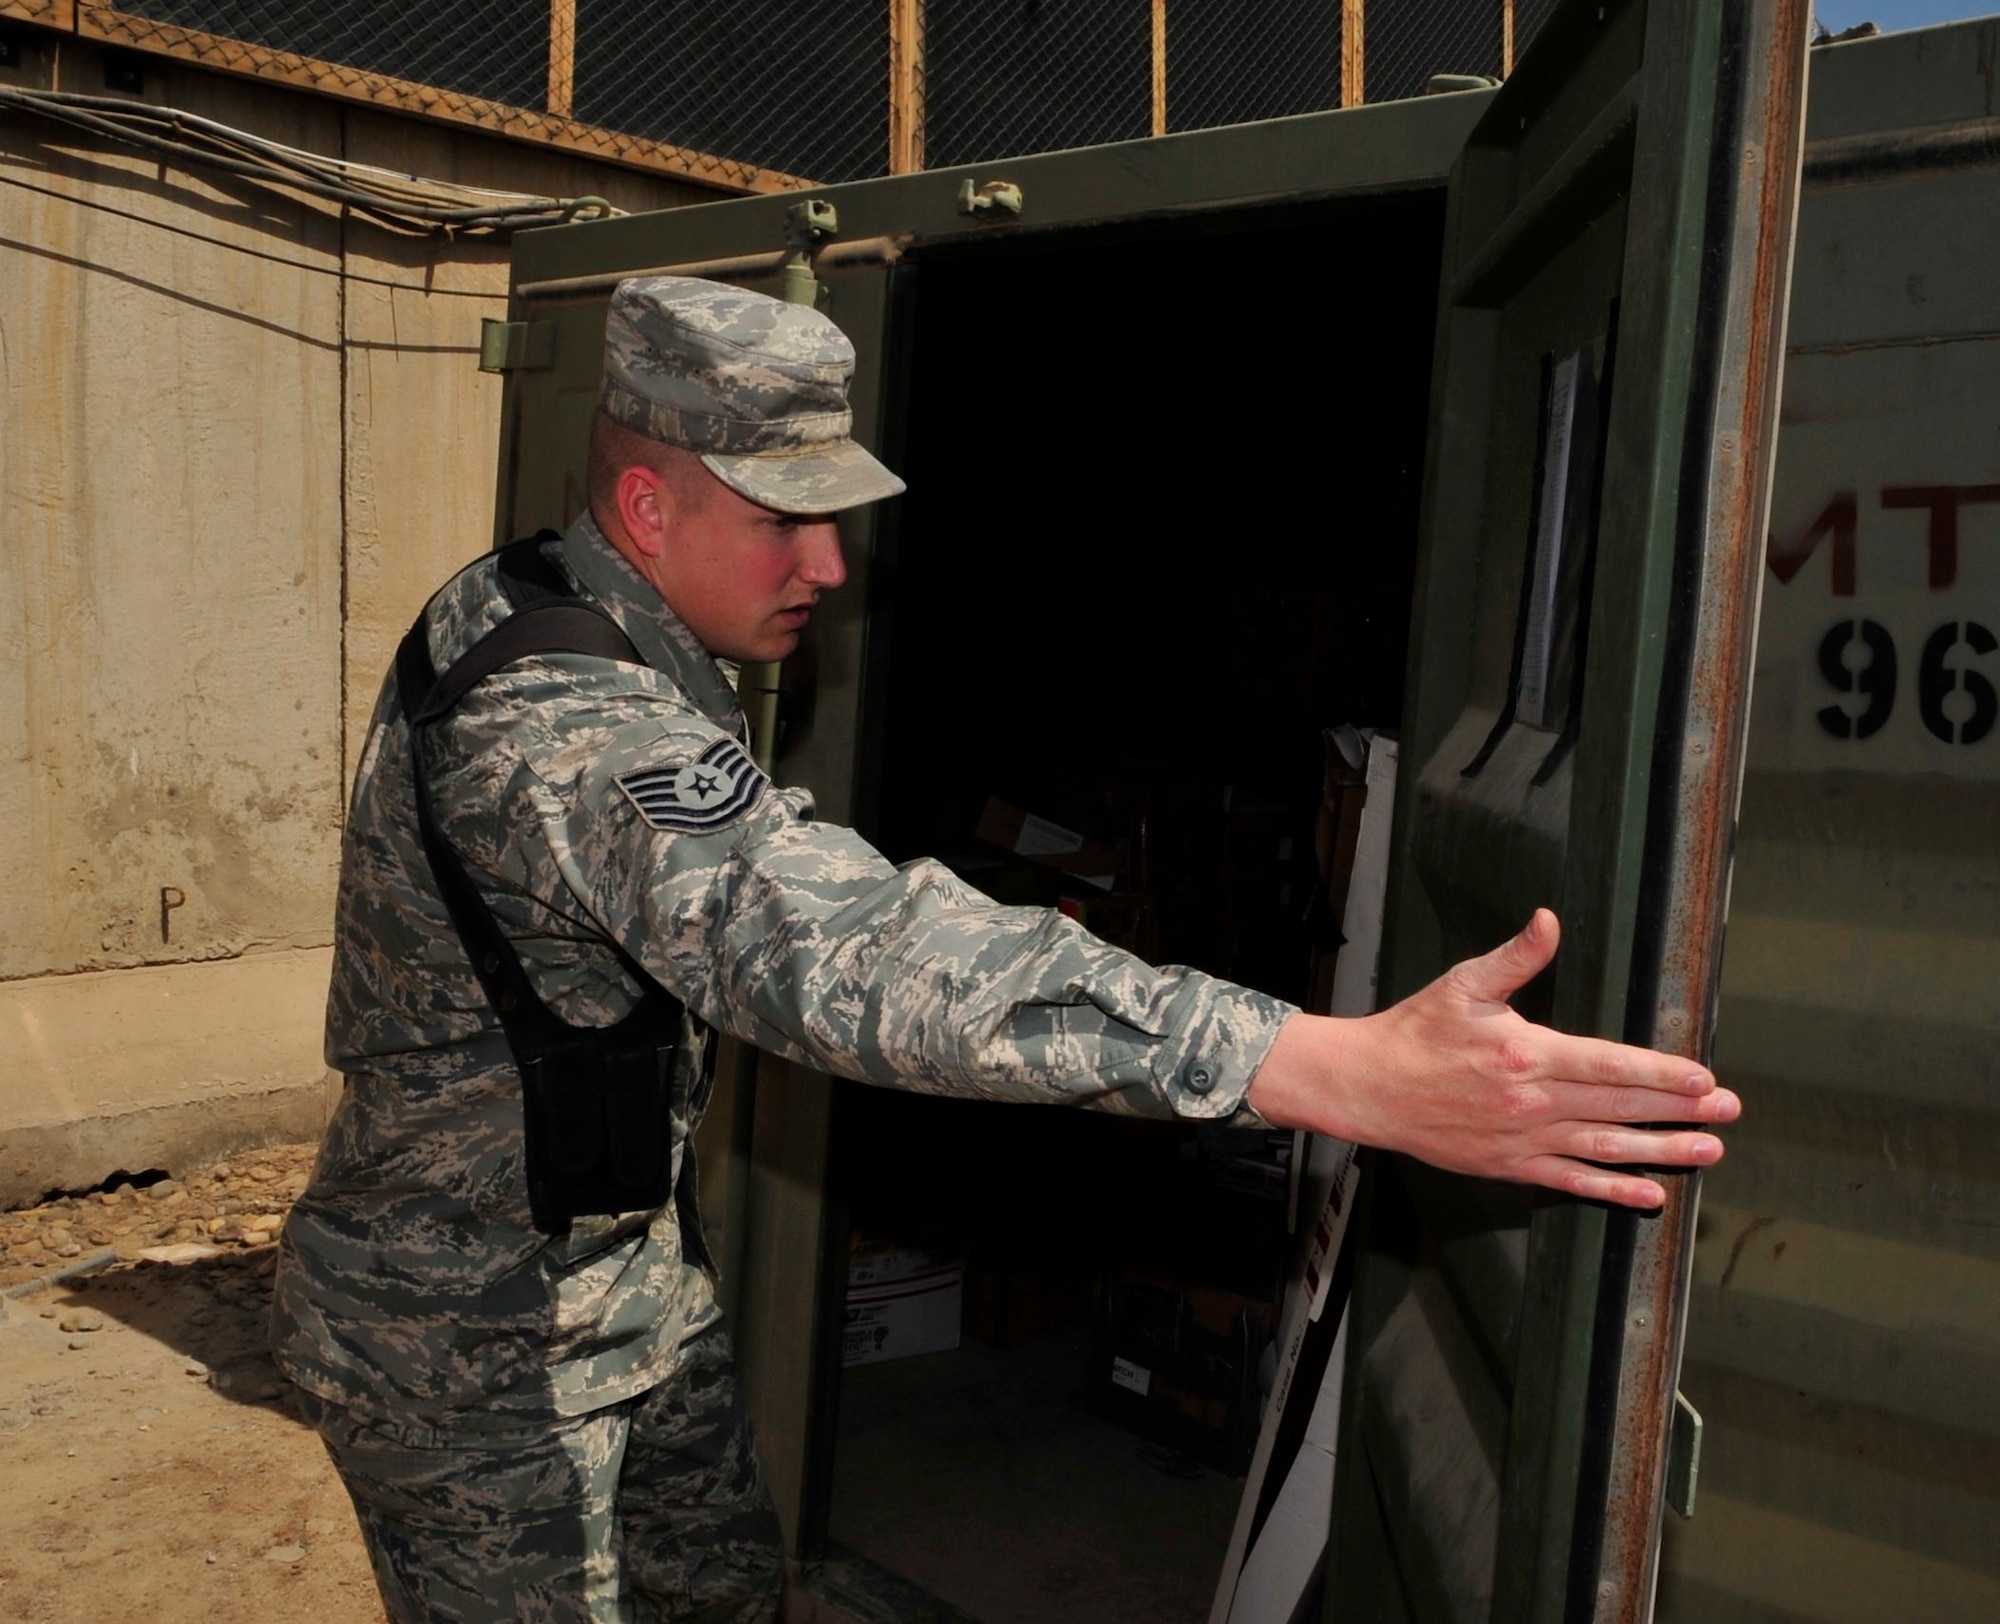 U.S. Air Force Tech. Sgt. Aaron Holmes, deployed from Grand Forks Air Force Base, N.D., and native of Cabot, Ark., opens the door of an evidence locker on Joint Security Station Shield, Iraq, April 7, 2011. Sergeant Holmes is a 17-year veteran and a paralegal assigned to the Law and Order Task Force. LAOTF Airmen gather and review evidence and documents on Iraqi detainees then turn over the cases to the Iraqi justice system. (U.S. Air Force photo by Senior Master Sgt. Larry A. Schneck)